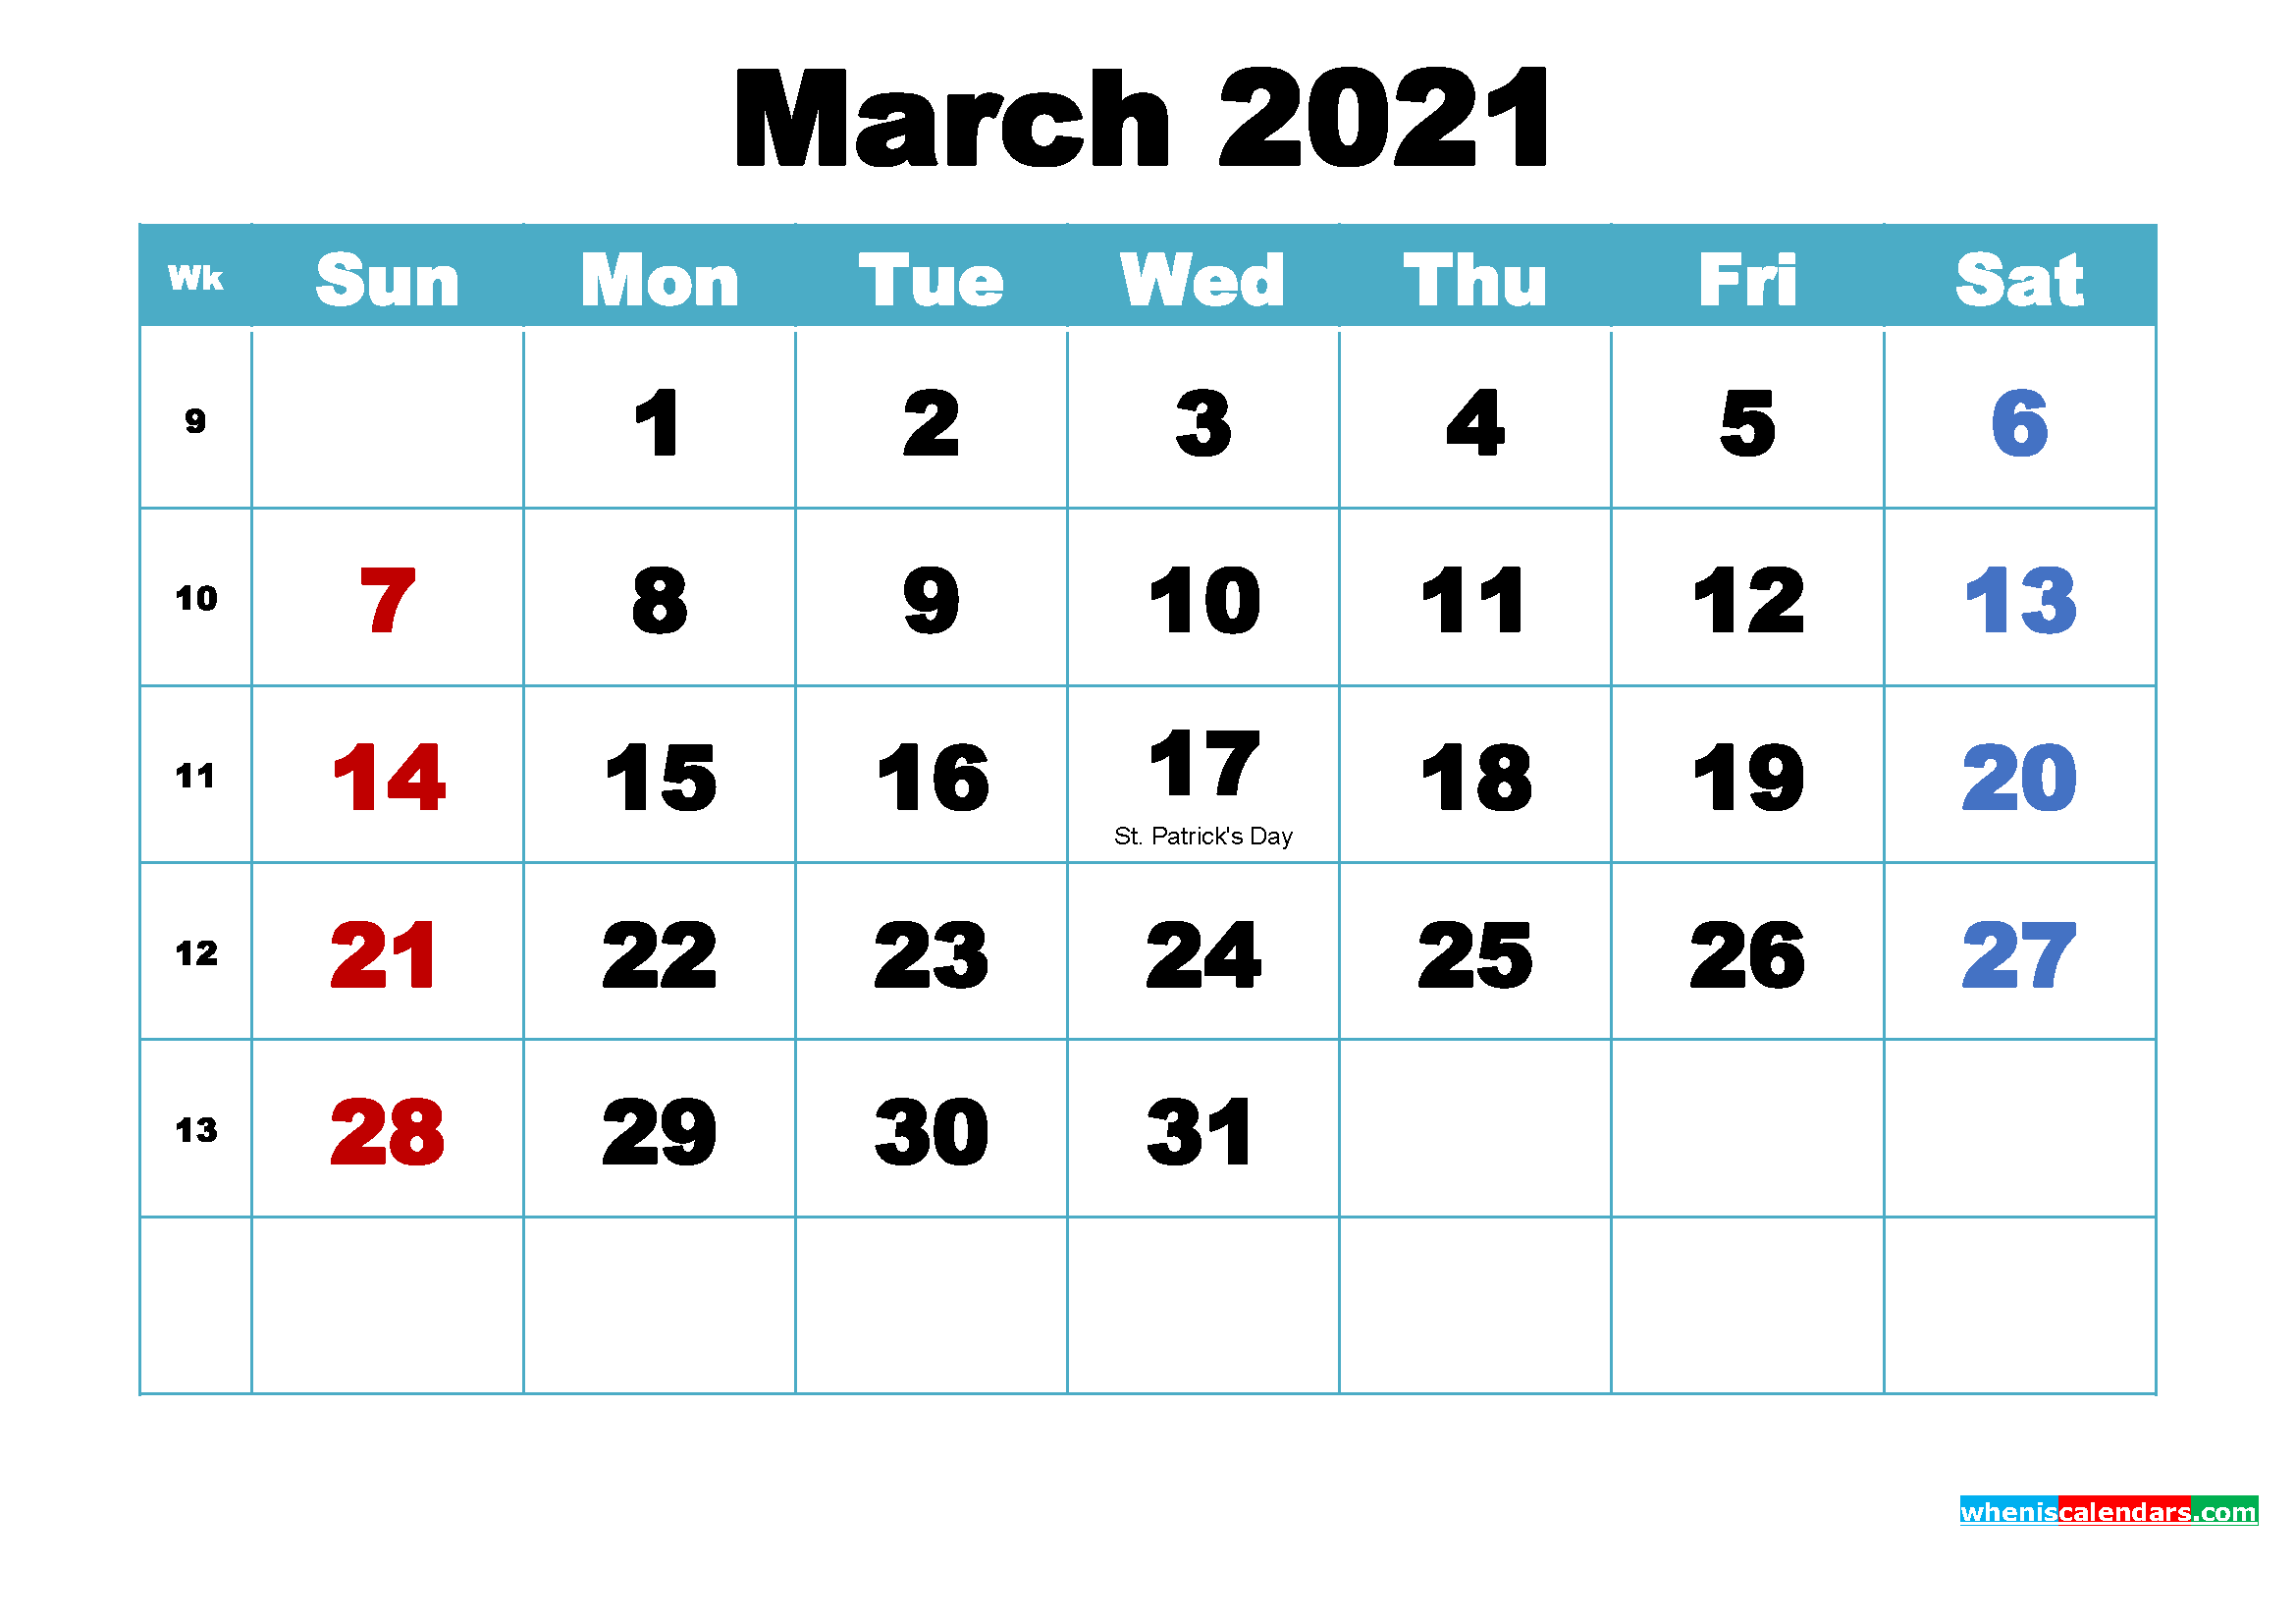 Printable March 2021 Calendar by Month